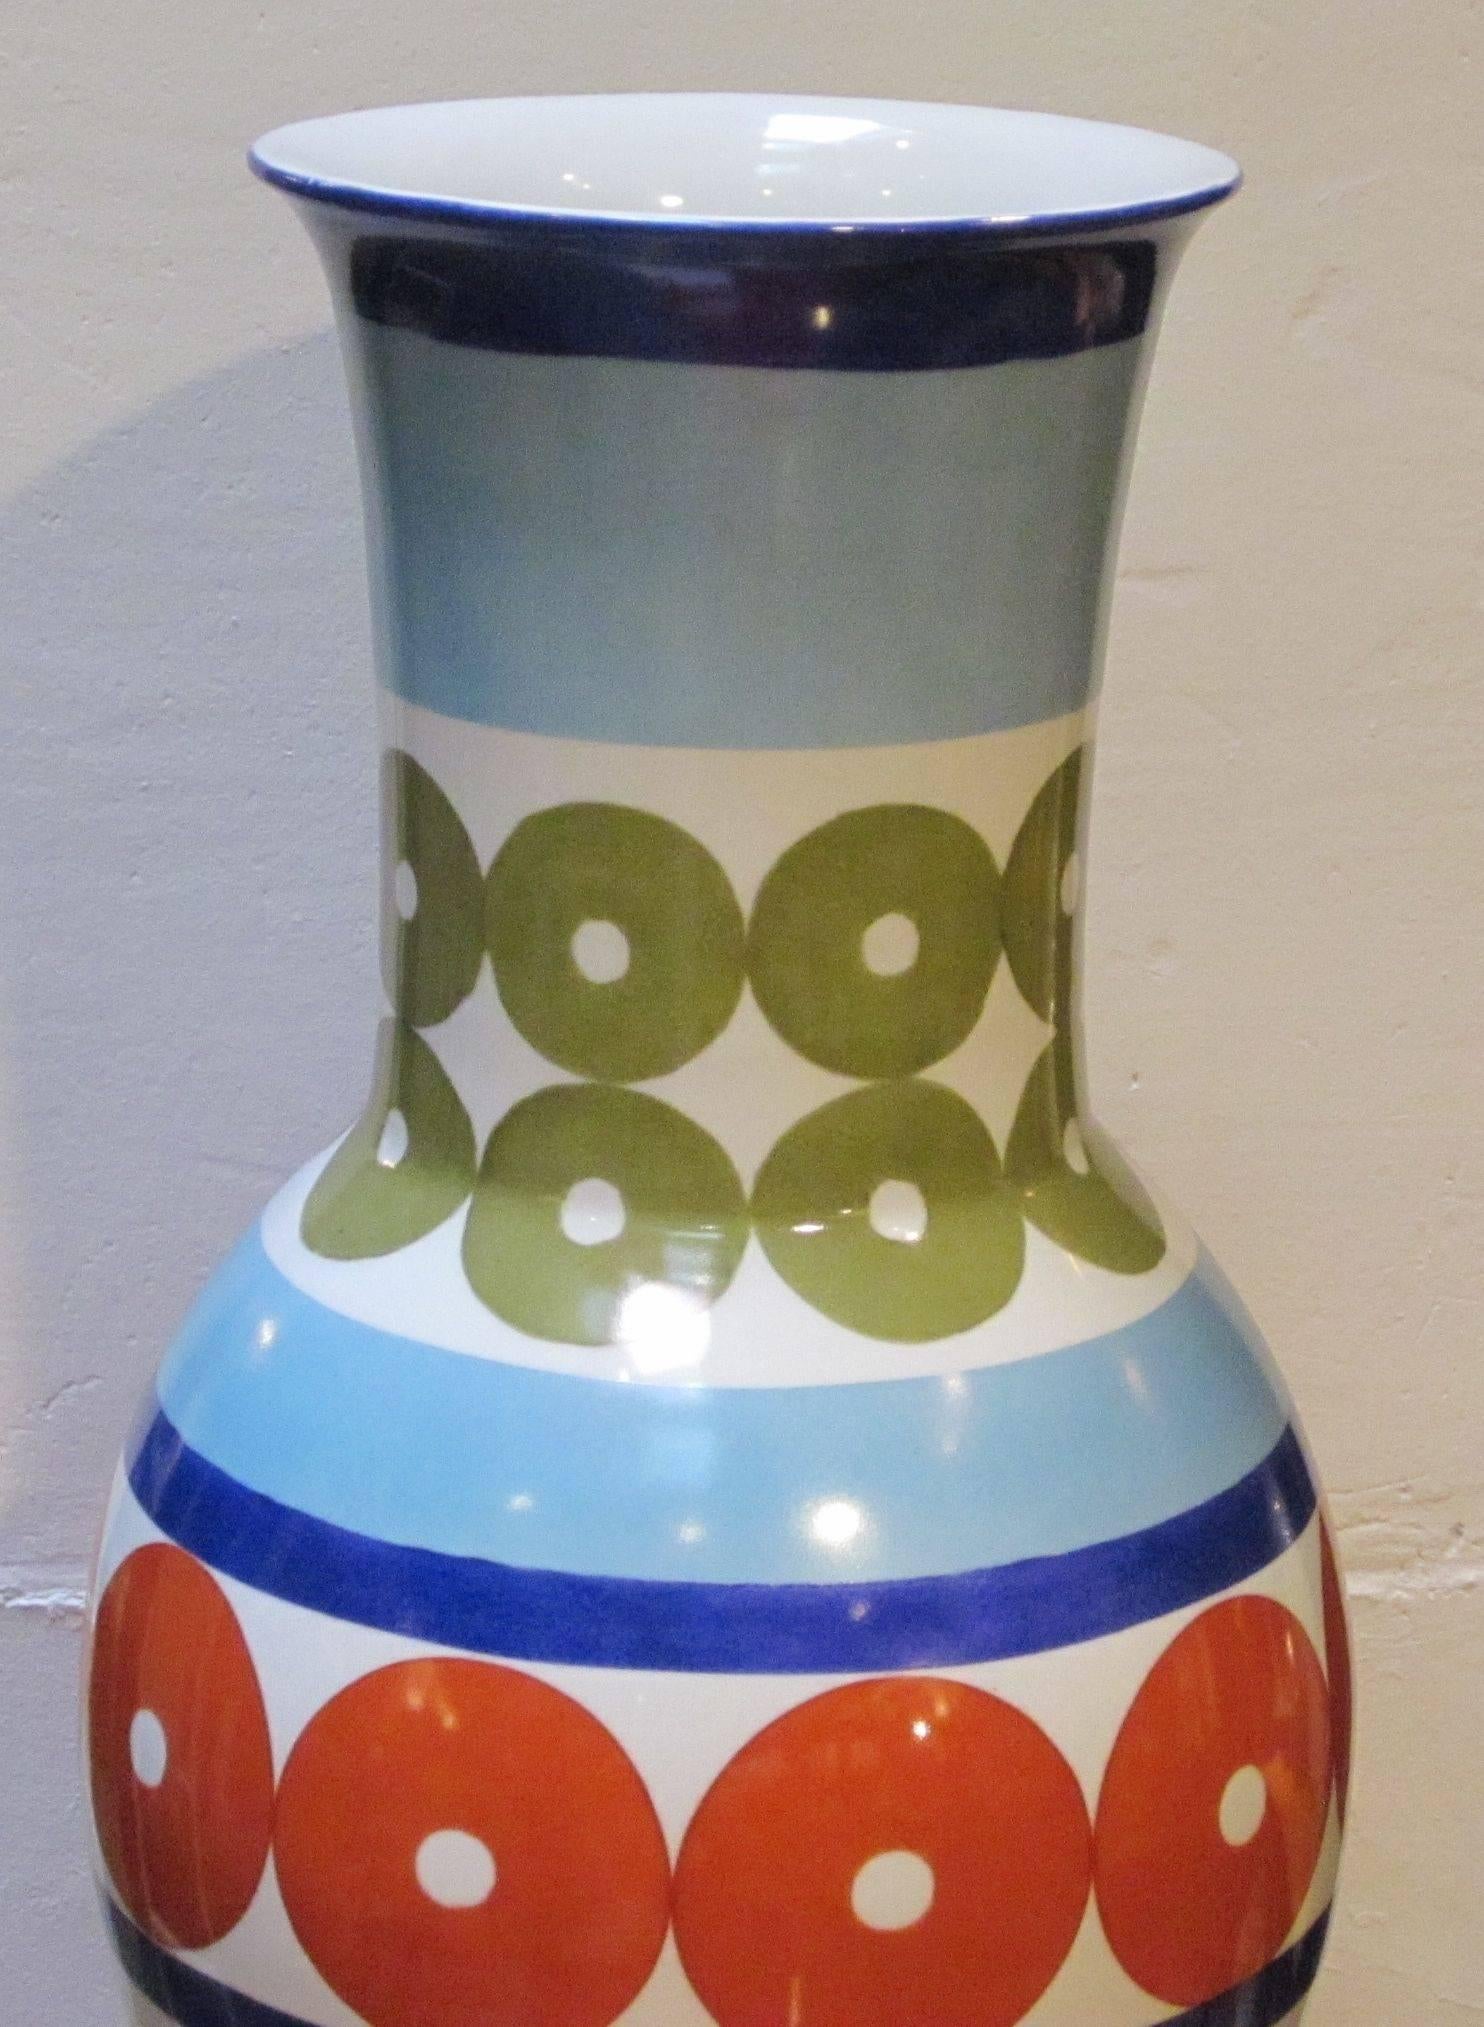 Contemporary Chinese brightly colored porcelain vase by Frederic De Luca.
Pale blue, white with olive and red circles, royal blue base.


